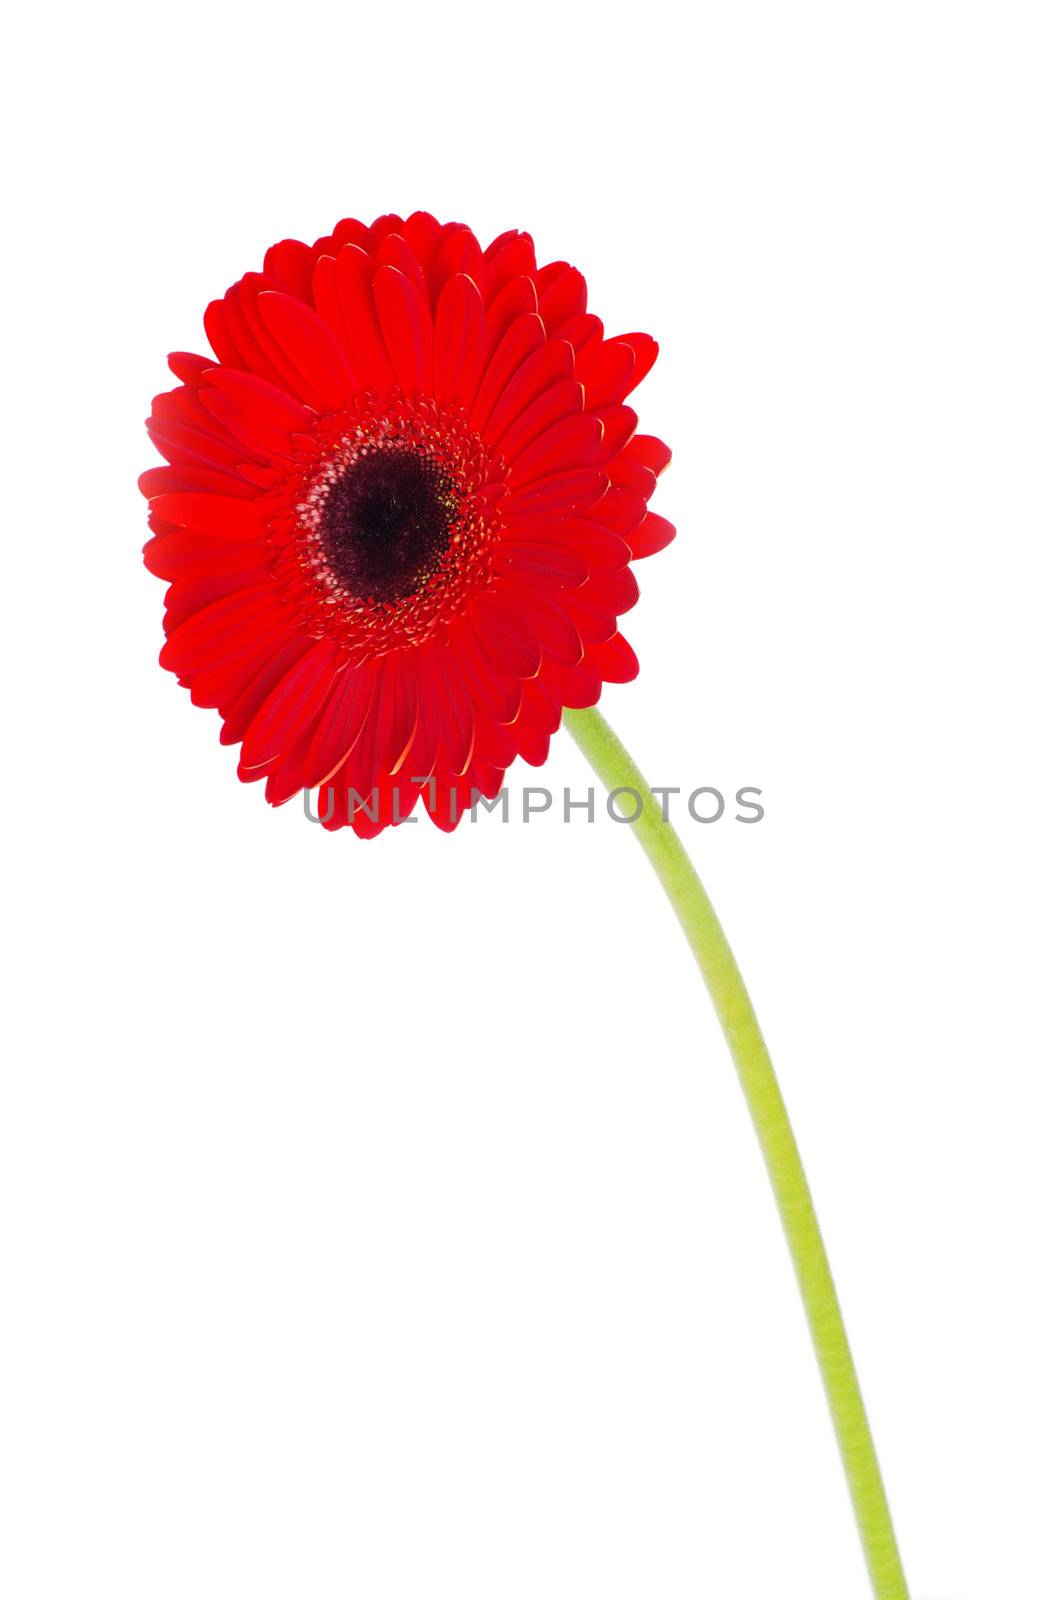 red gerbera flower closeup on white background